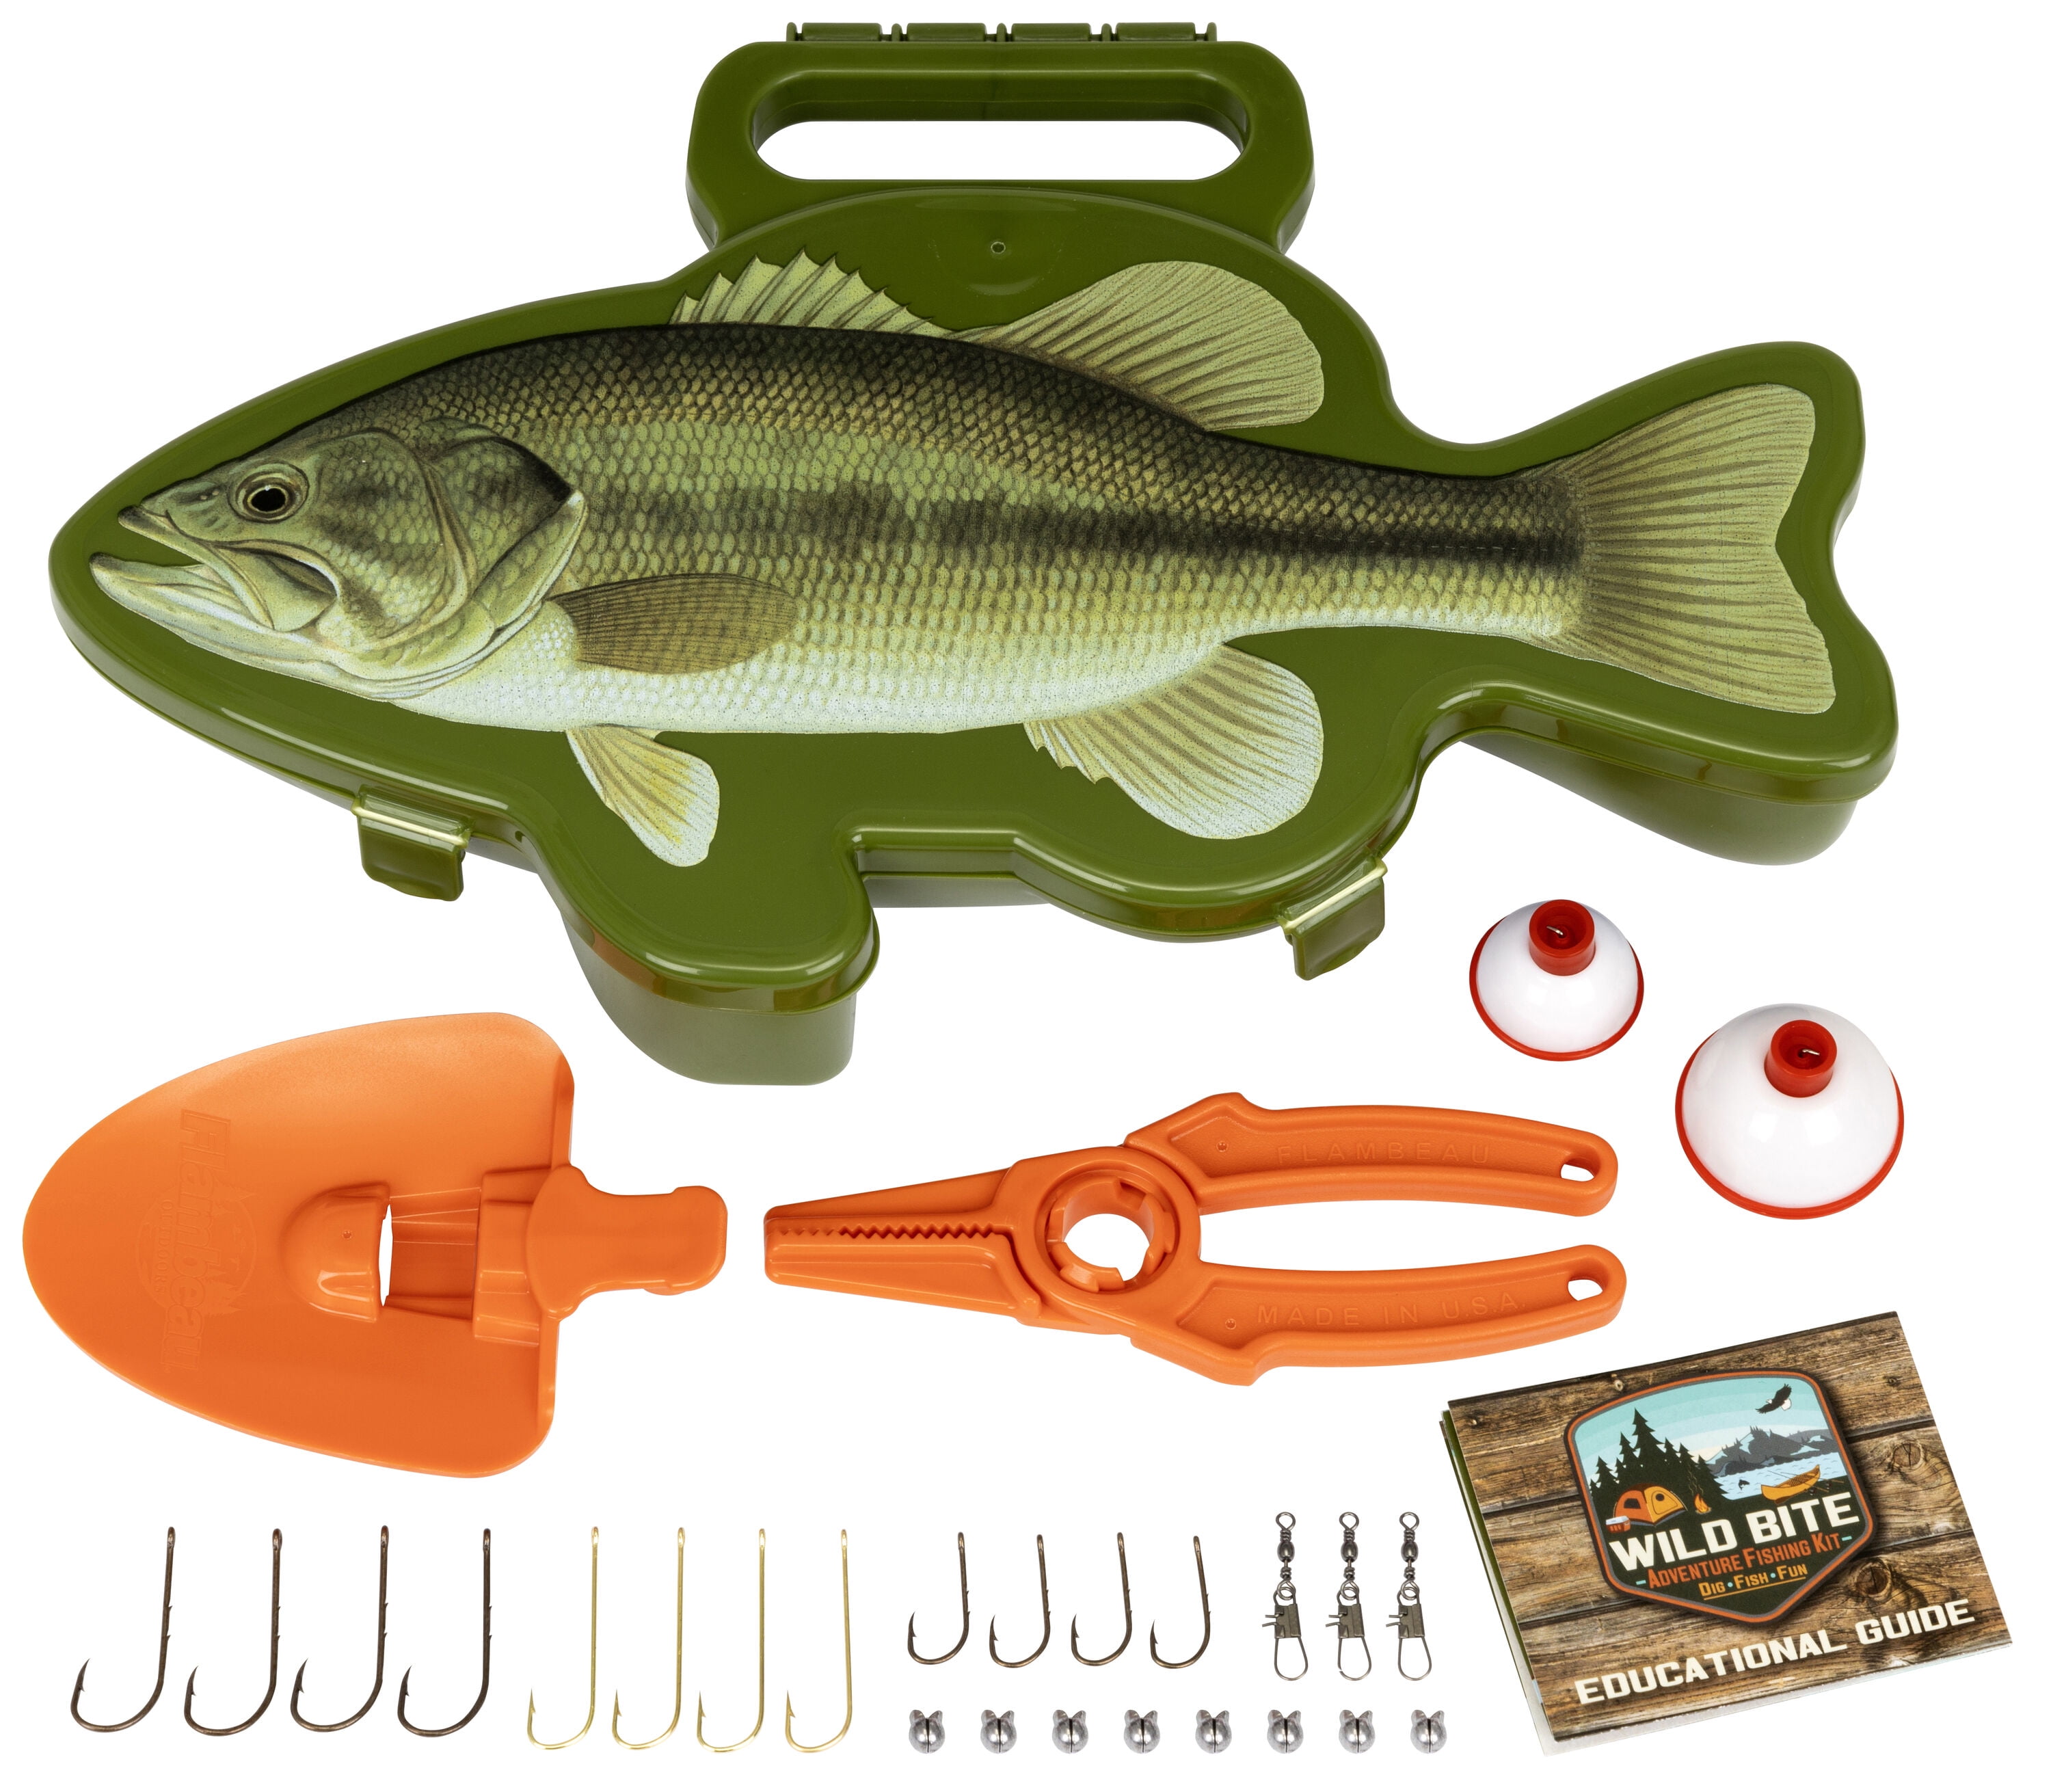 Generic Wood Fishing Tackle Toy For Kids - W5-20 @ Best Price